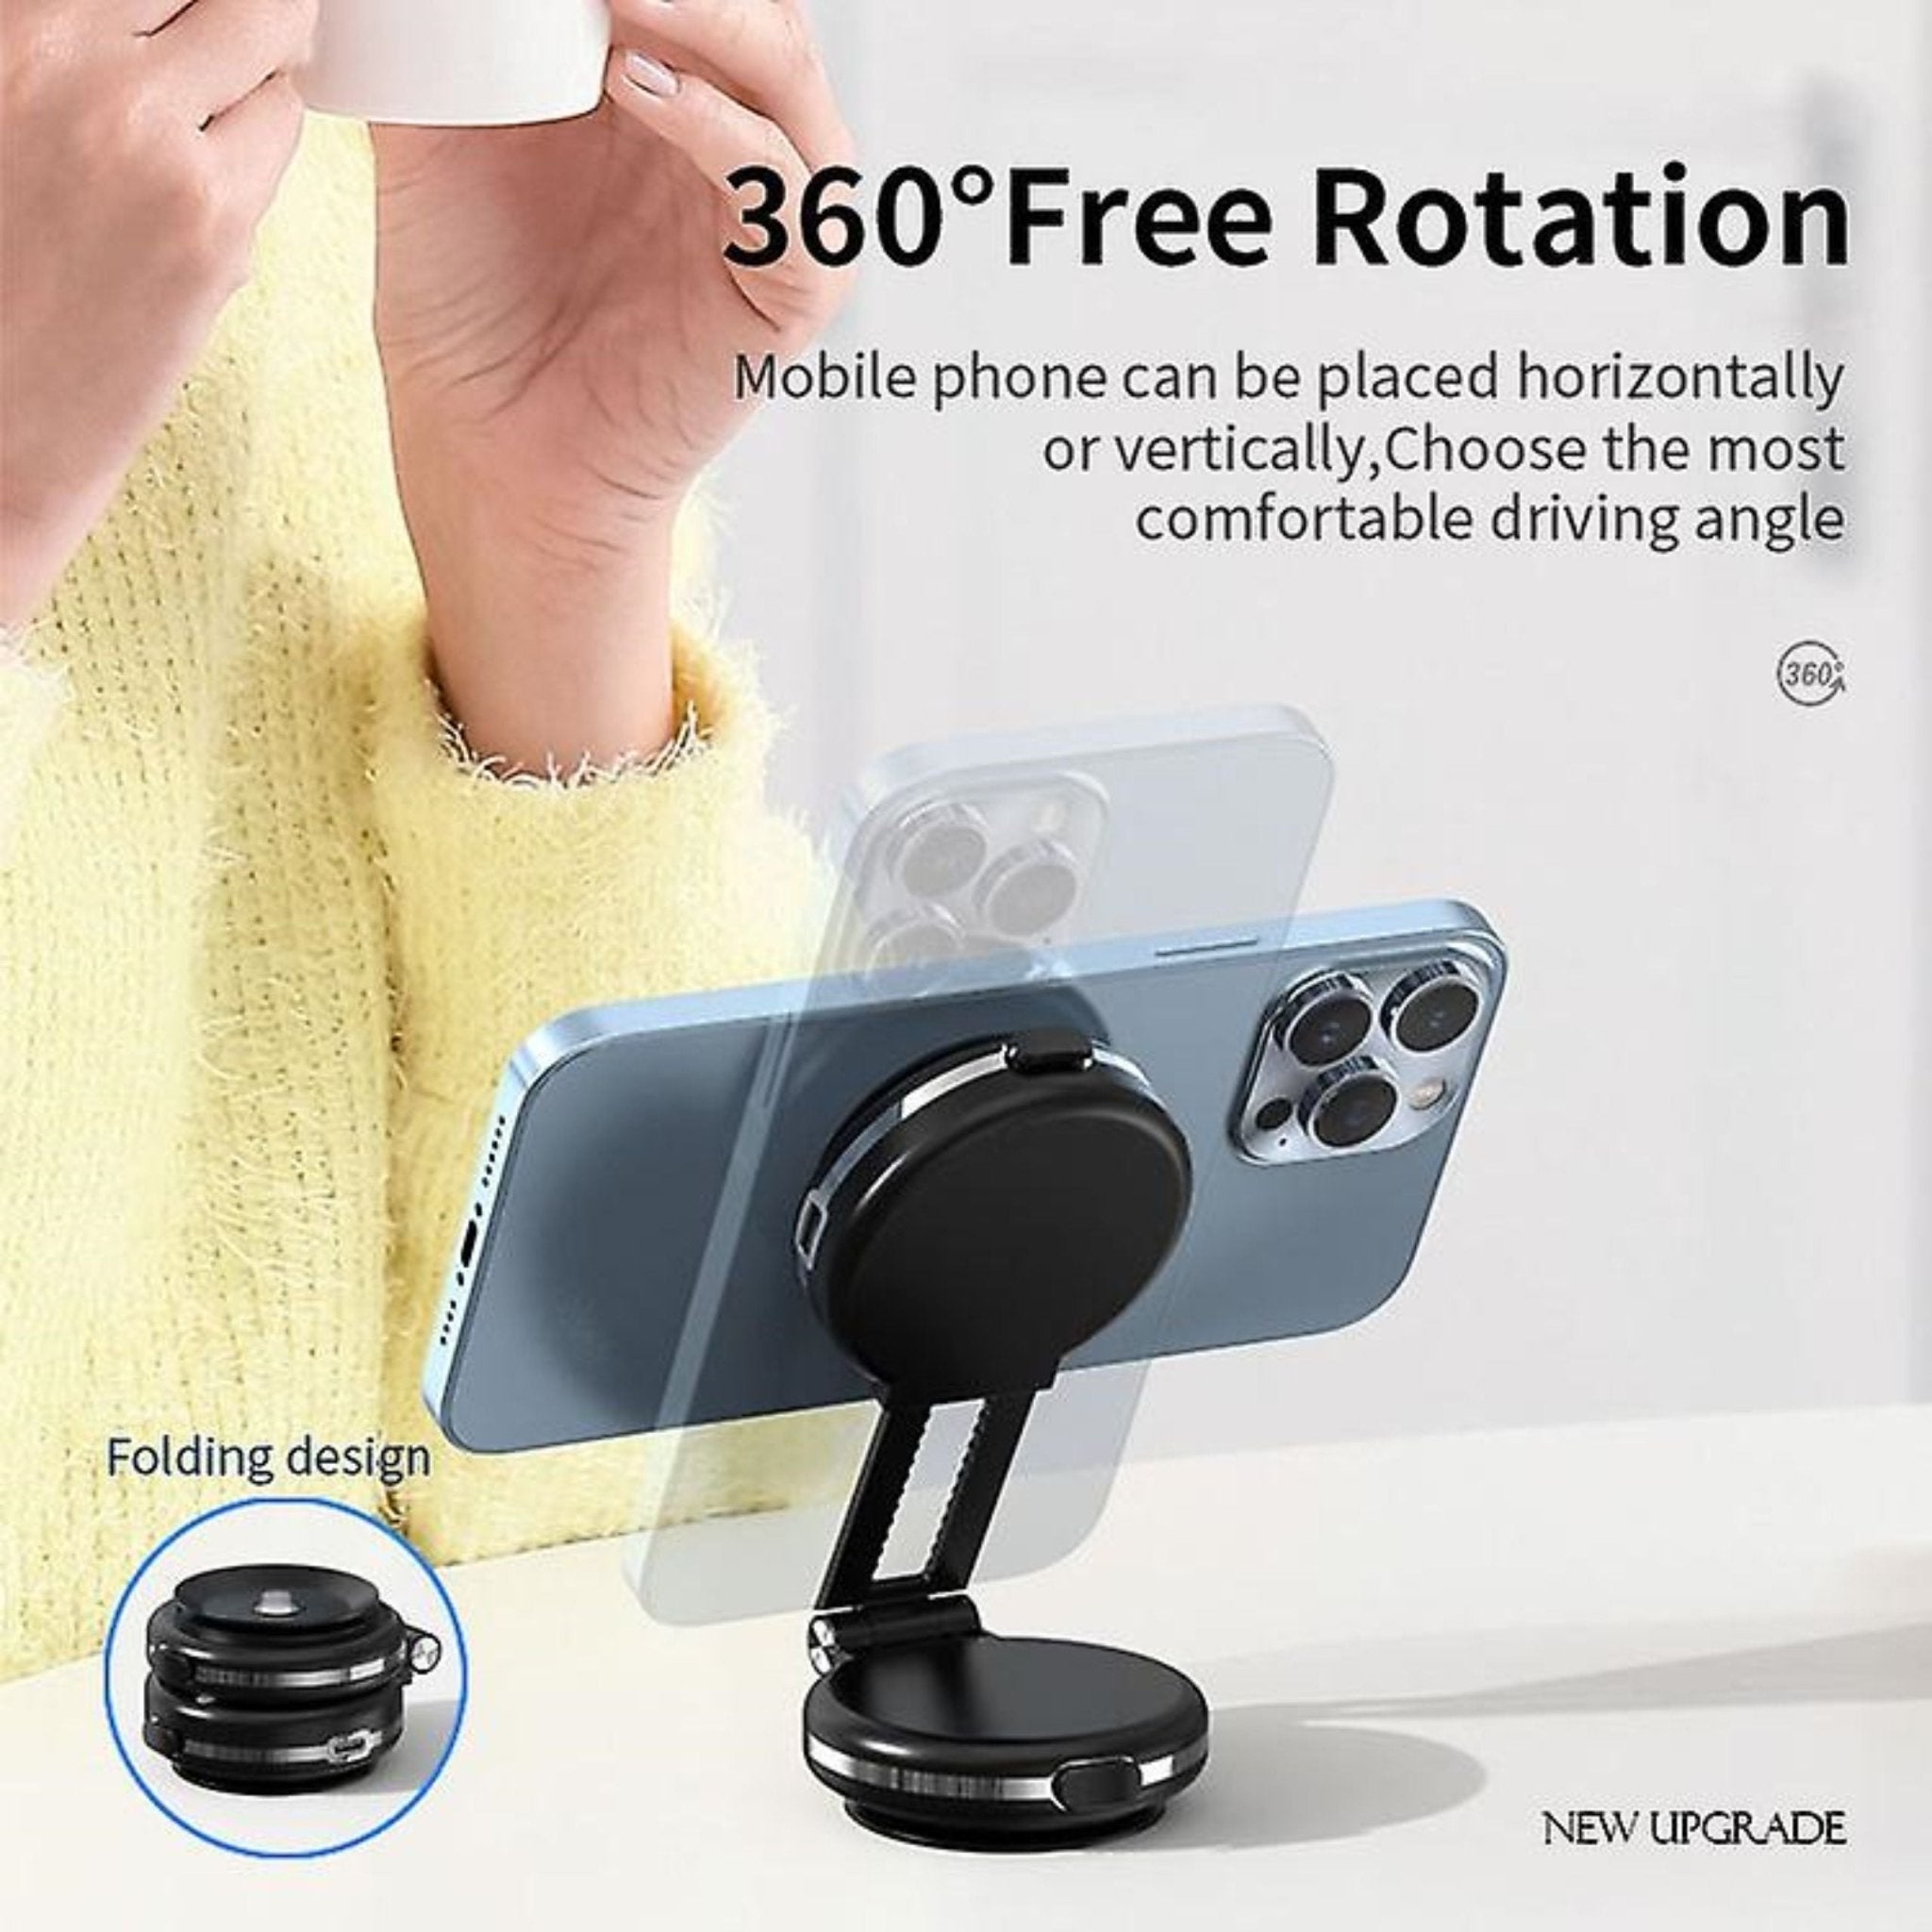 Vacuum Adsorption Rechargeable Car Mount Holder 360 Degree Rotating - Black